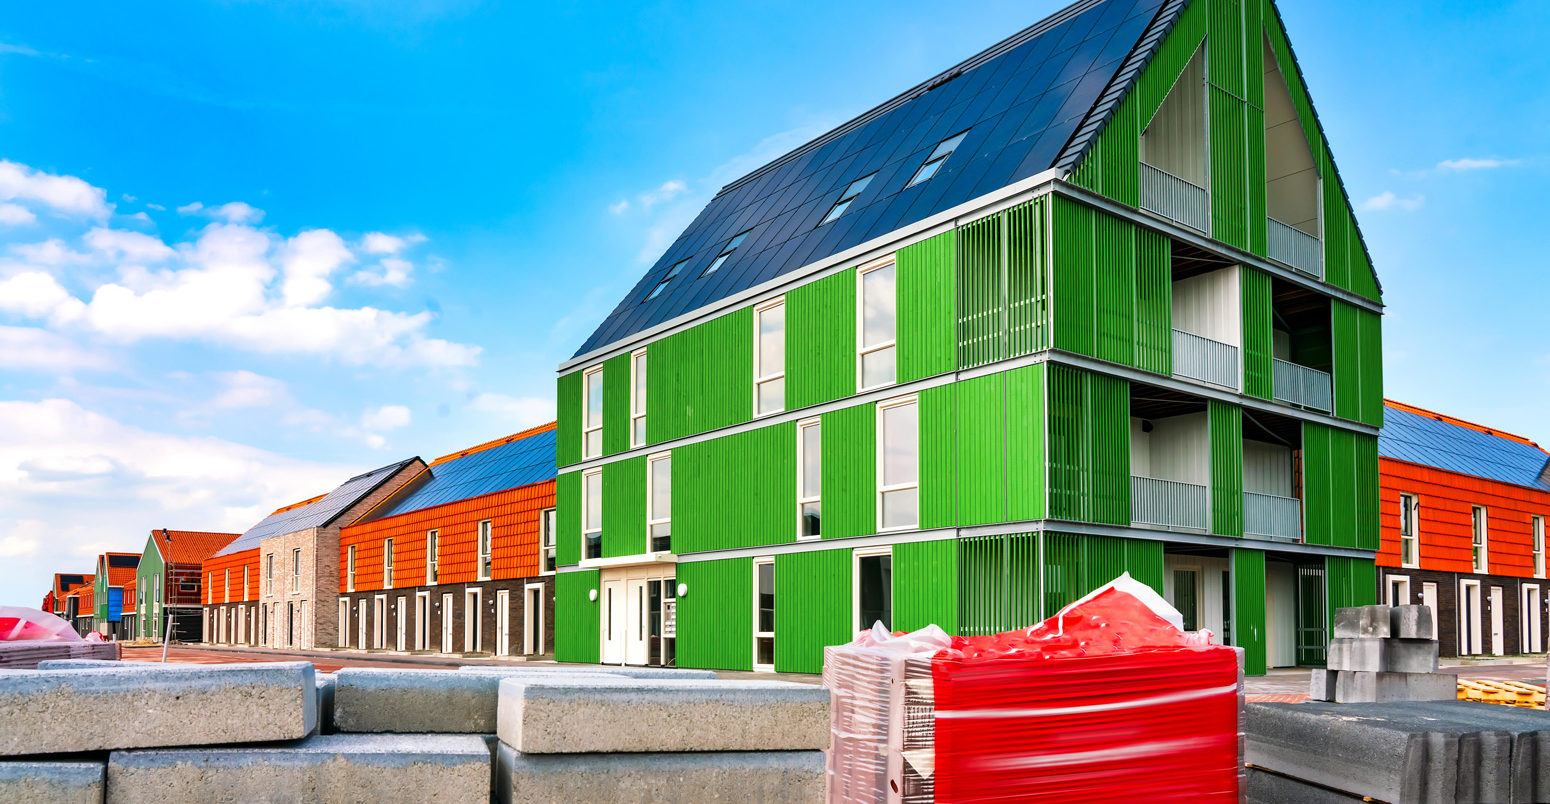 New construction site with roof solar panels. Rüdesheim, Germany. 22 June 2019. Credit: KH-Pictures / Alamy Stock Photo